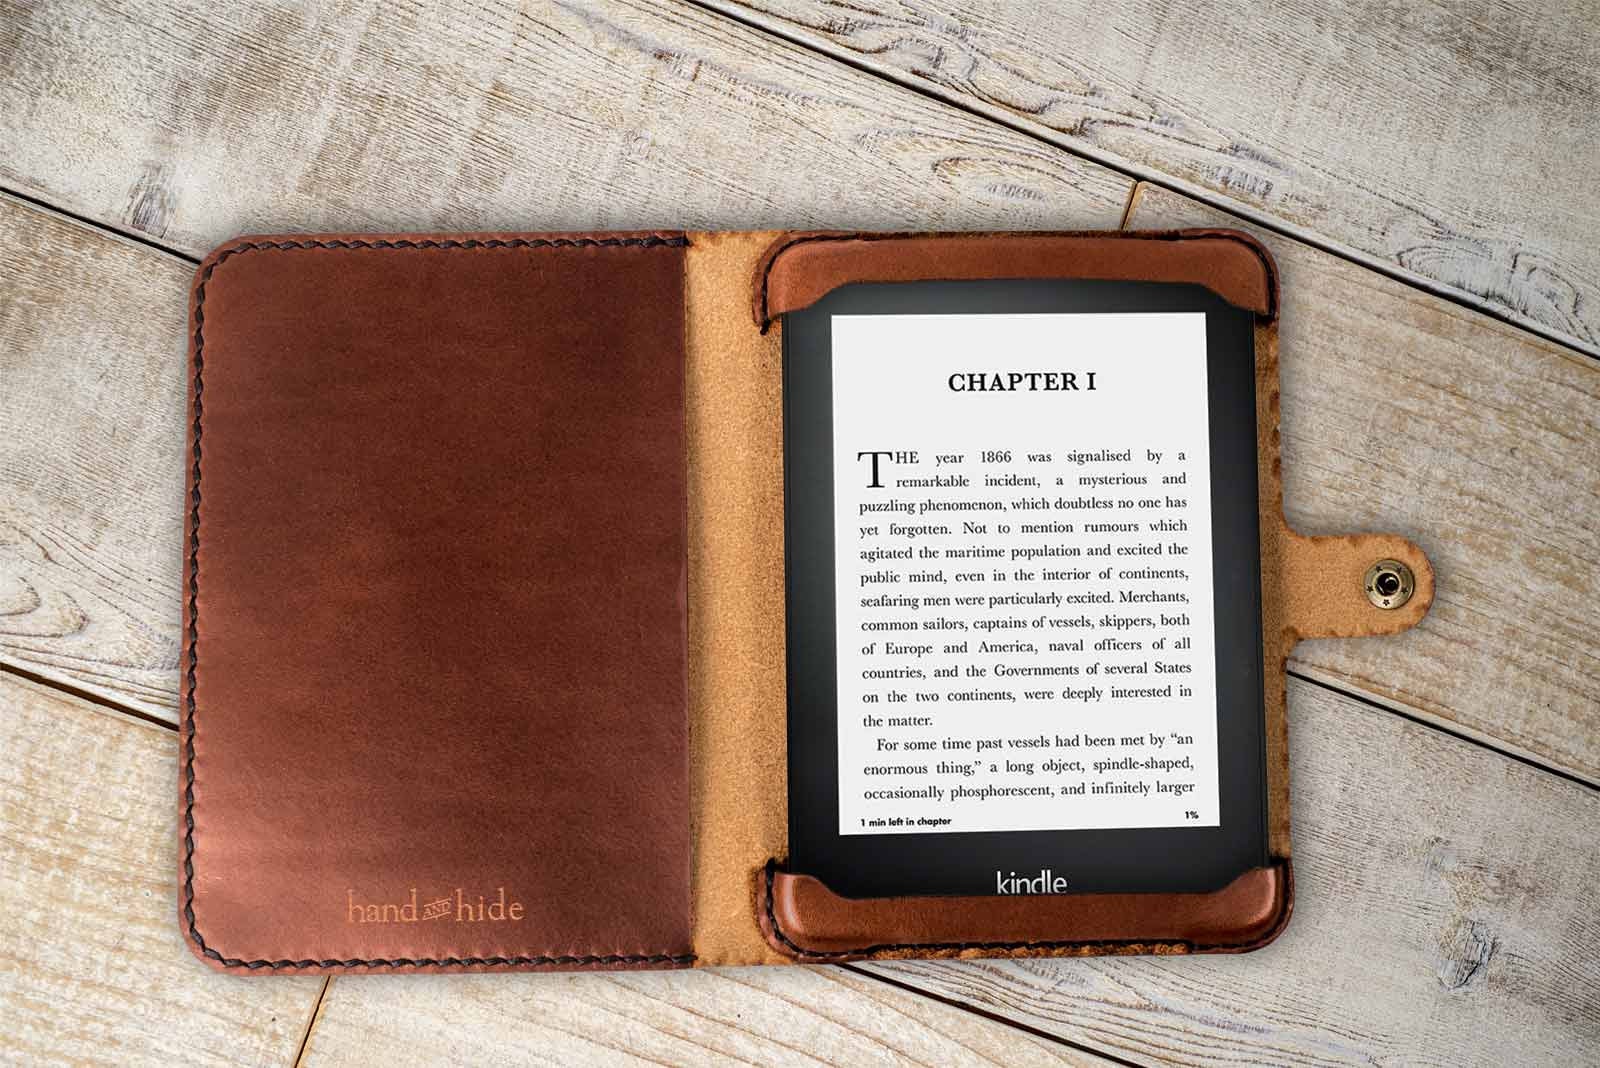 Kindle Paperwhite 2 Case,Kindle Paperwhite 3 Cover,Felfy Leather Case for Kindle Paperwhite 1/2/3,Premium Leather Ultra Thin Colorful Paniting Cover Wallet Flip Case with Built-in Stand and Front/Back Protection Magnetic Auto Wake & Sleep Function Kickstan